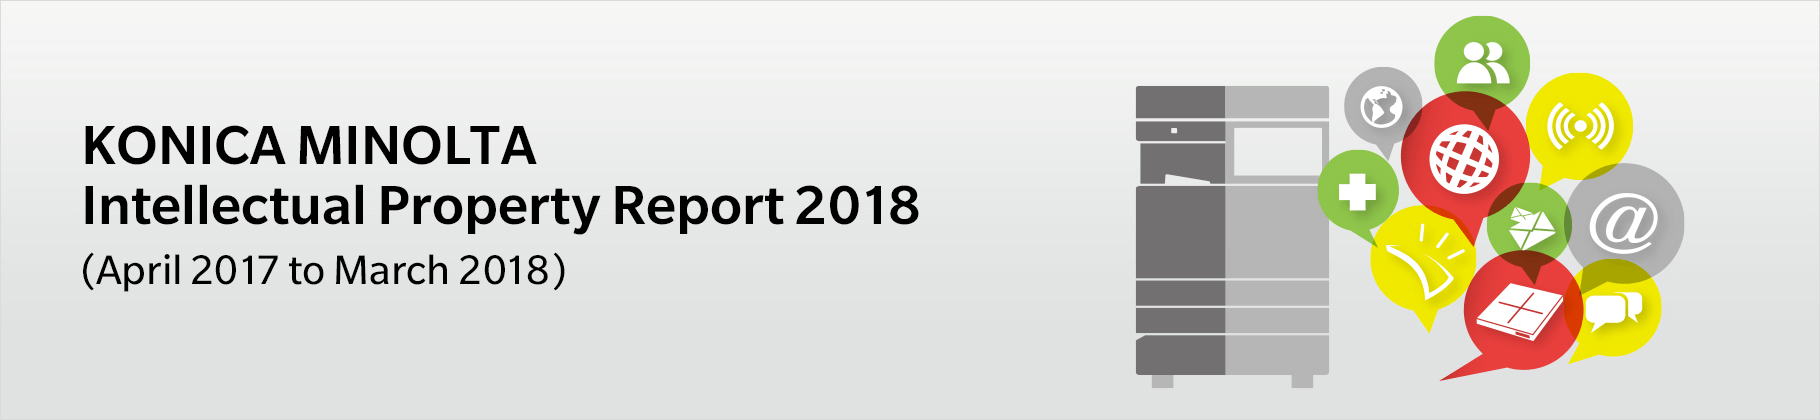 Intellectual Property Report 2018(April 2017 to March 2018)